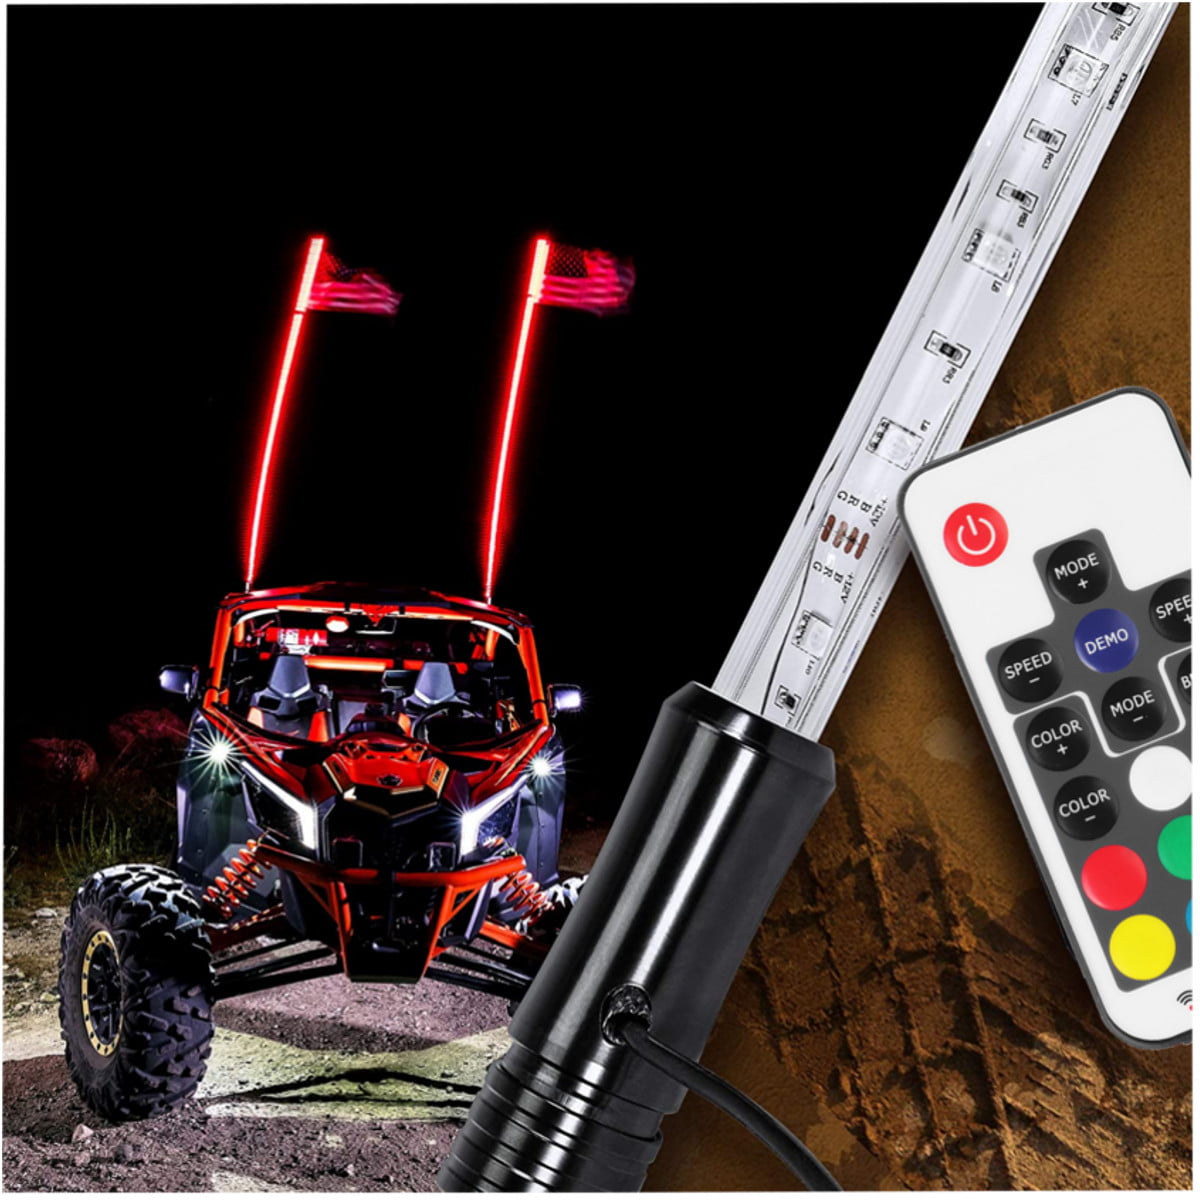 Xprite 5FT Spiral LED Whip Lights Flag Pole with Remote Control for UTV ATV Truck Polaris RZR XP 1000 Can am Maverick X3 Side by Side Quad Dune Buggy 2PCS 